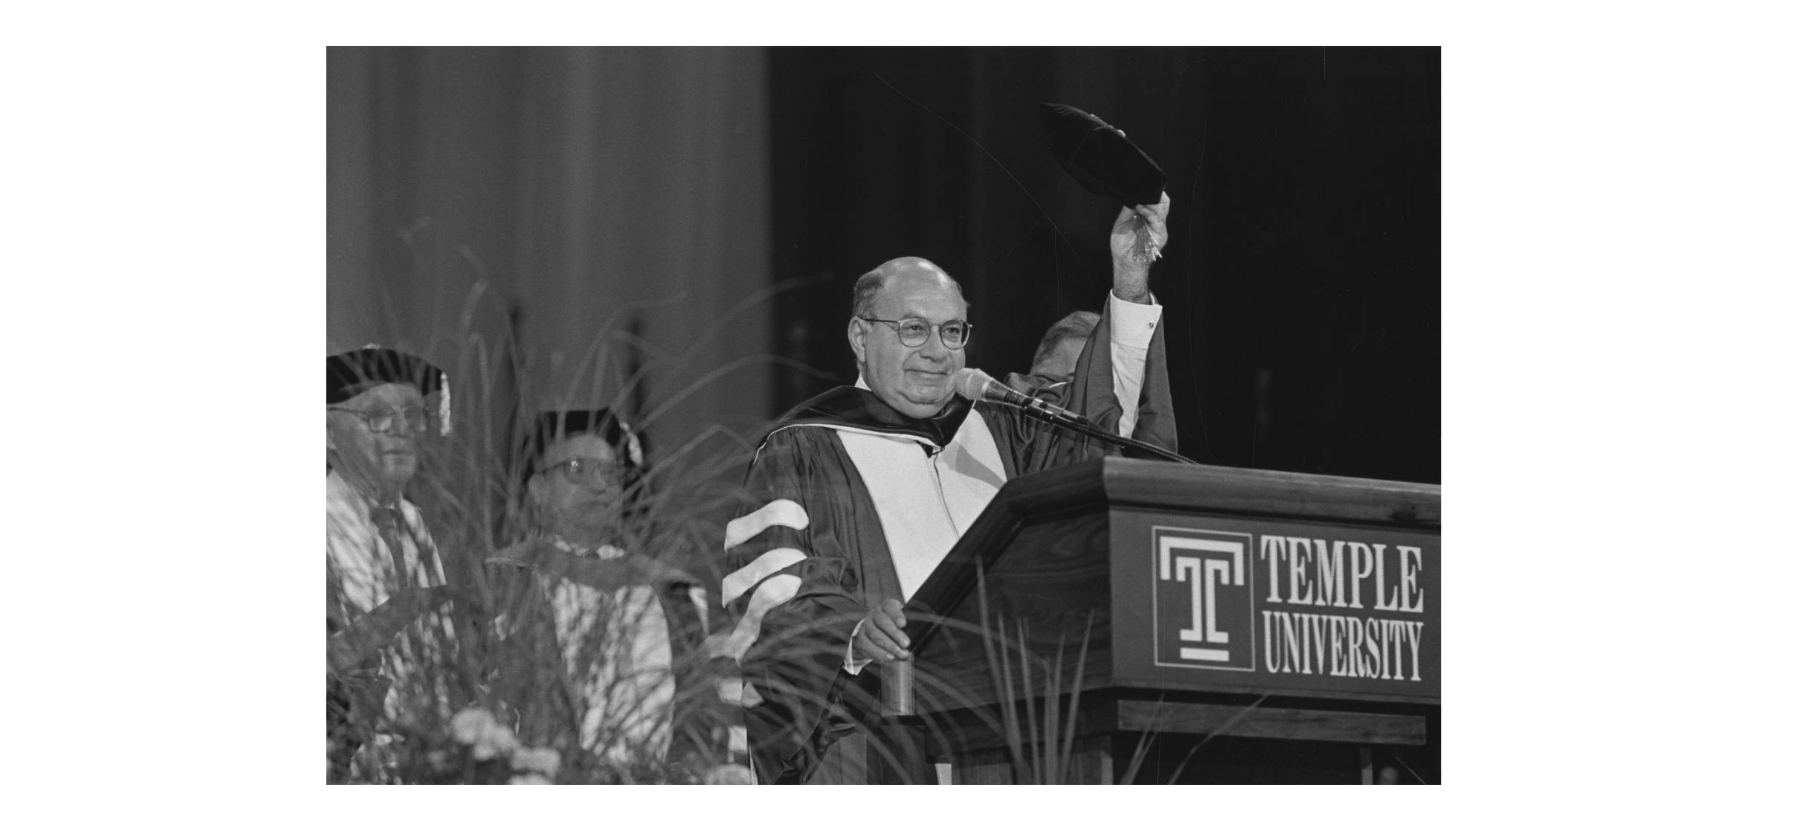 Howard Gittis received an honorary Doctor of Laws degree, at the podium at the 1997 Temple University commencement